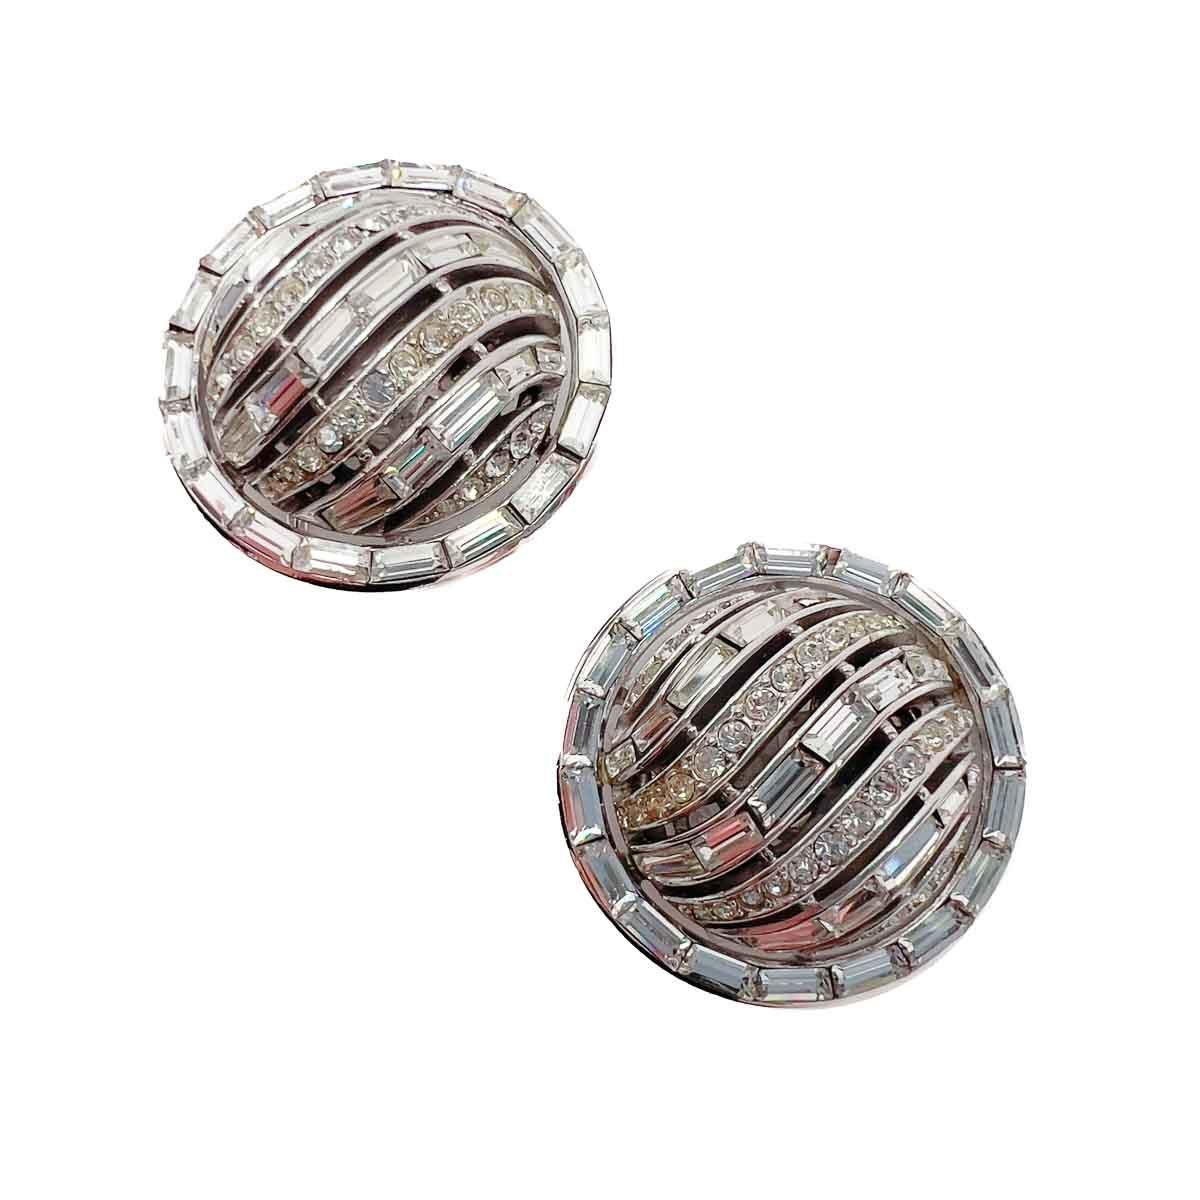 A pair of large eye-catching Vintage Trifari Deco Baguette Earrings. A sublime design featuring a stone rich front. The stones set in swathes across and around the design. The baguette crystal cut adding to the Art Deco design rich look. The